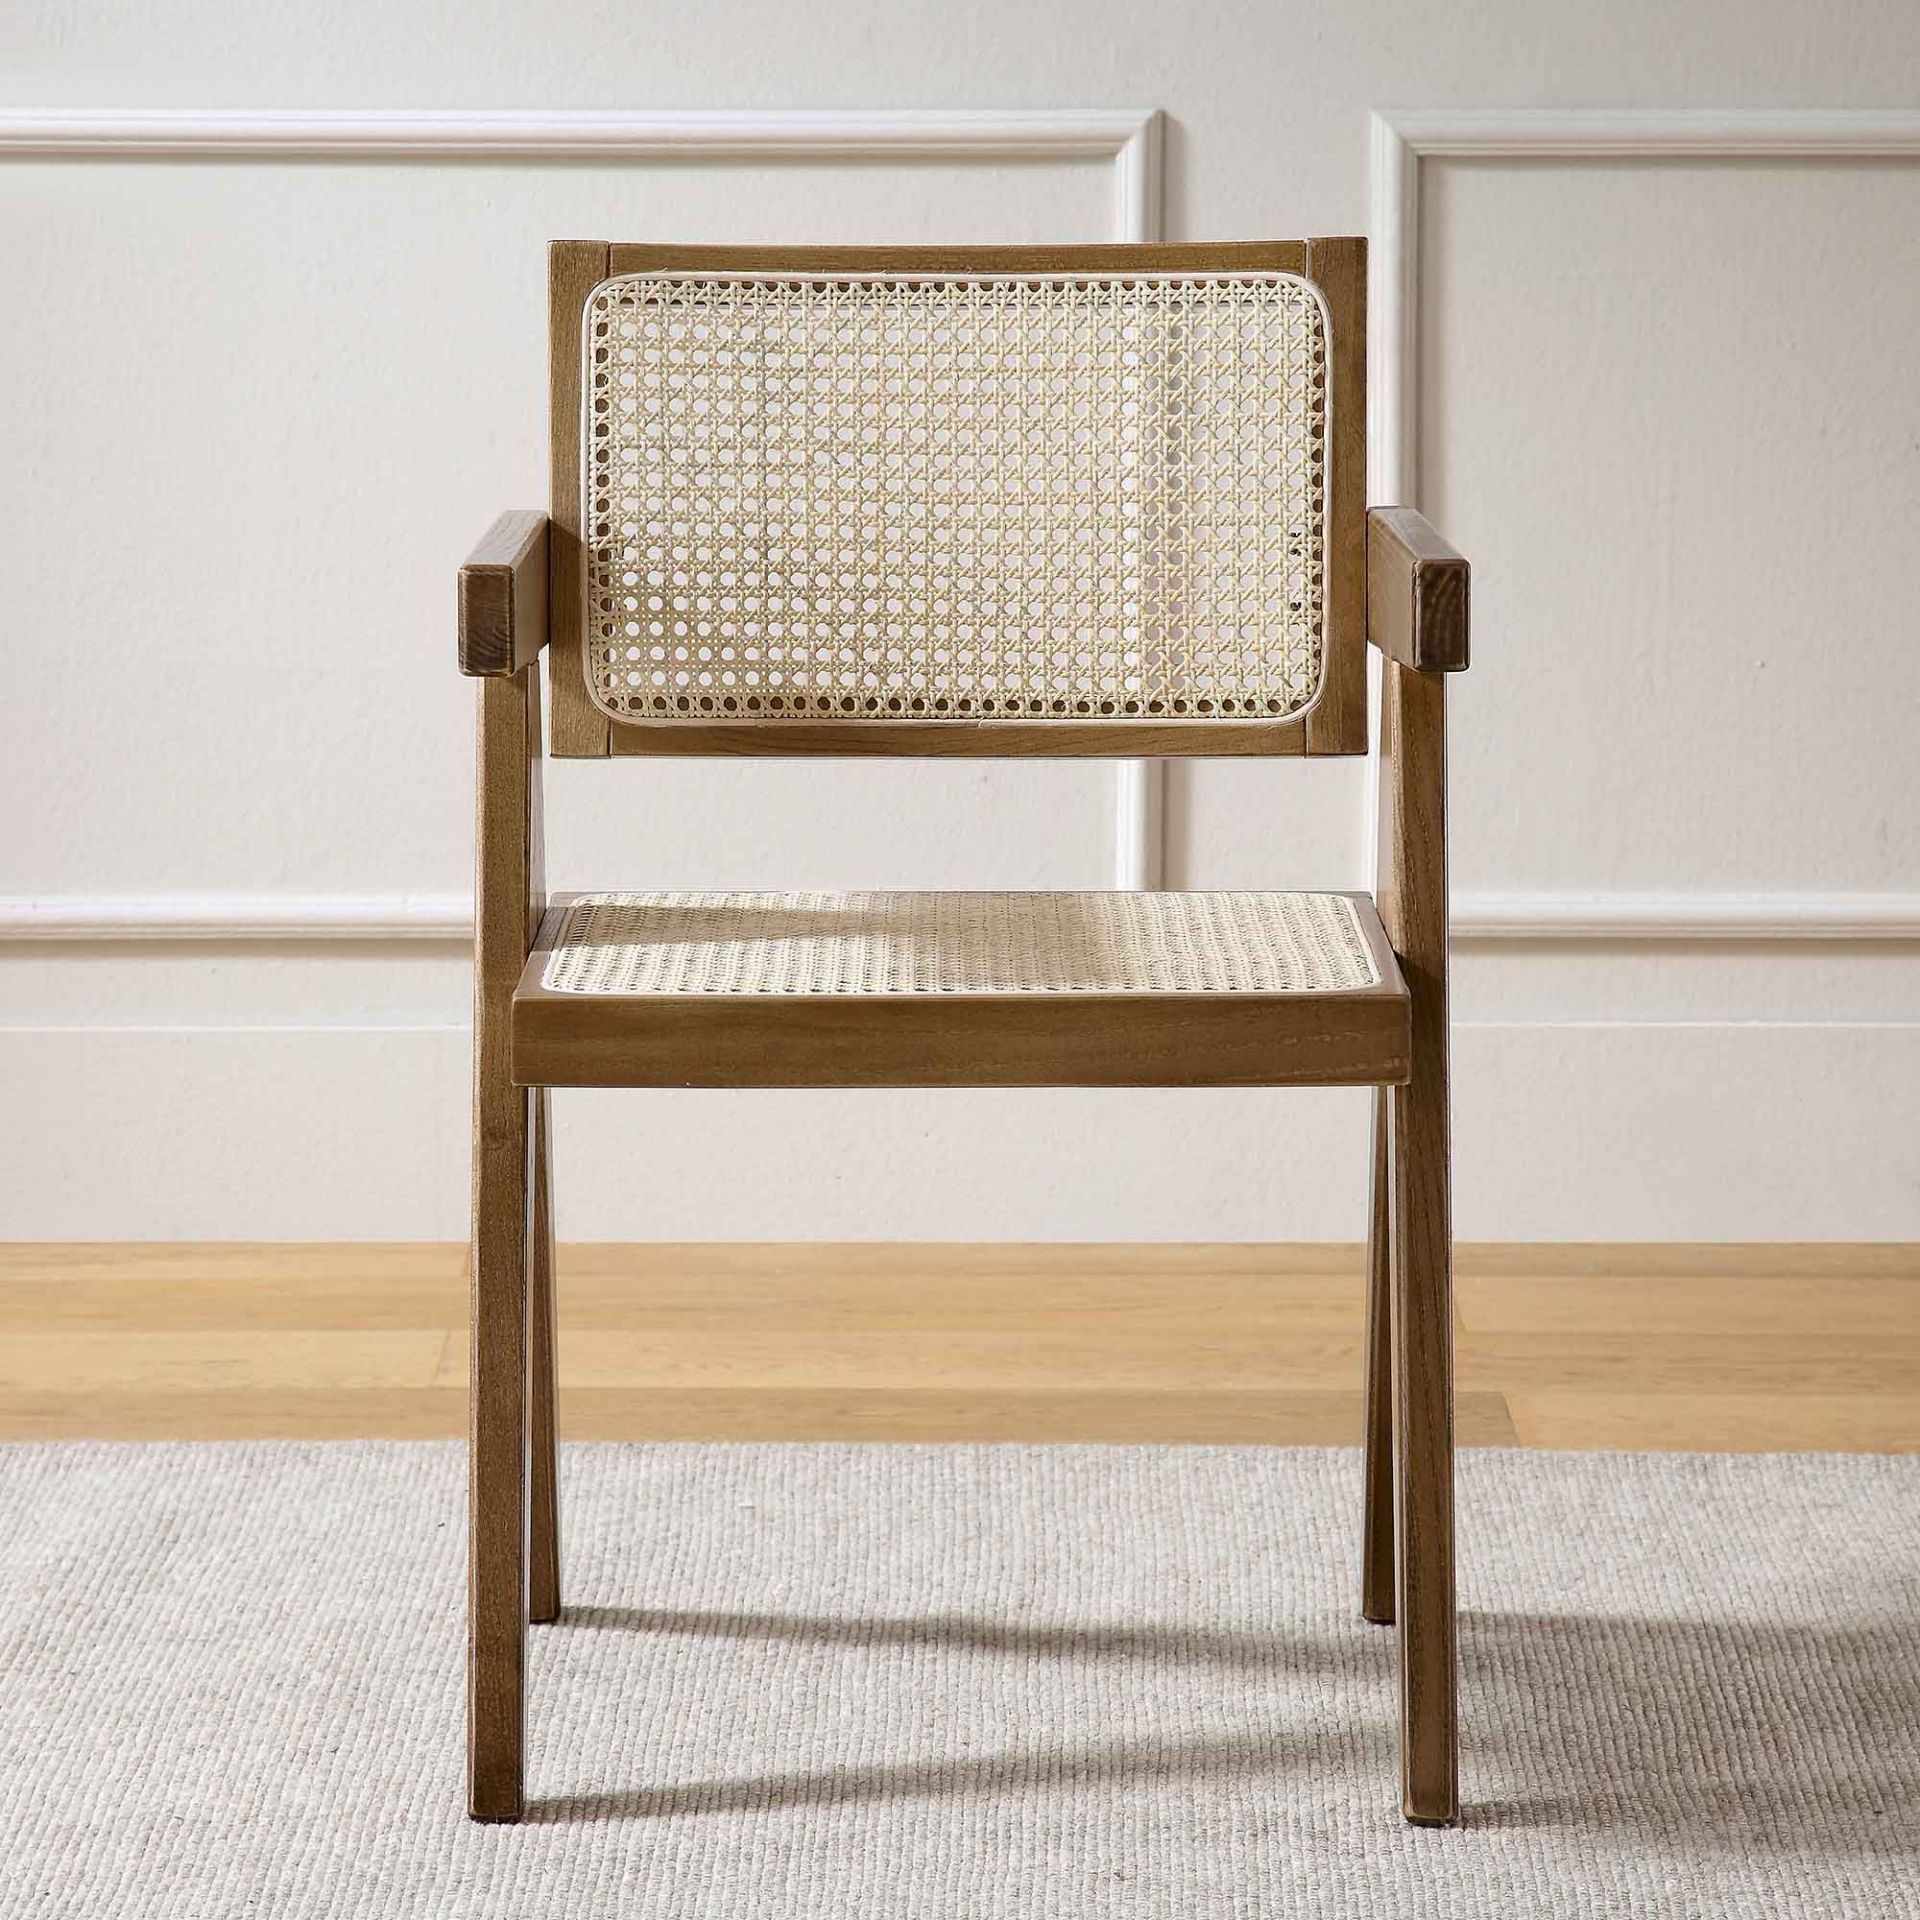 Jeanne Light Walnut Cane Rattan Solid Beech Wood Dining Chair. - R13.7. The cane rattan in the chair - Image 2 of 2